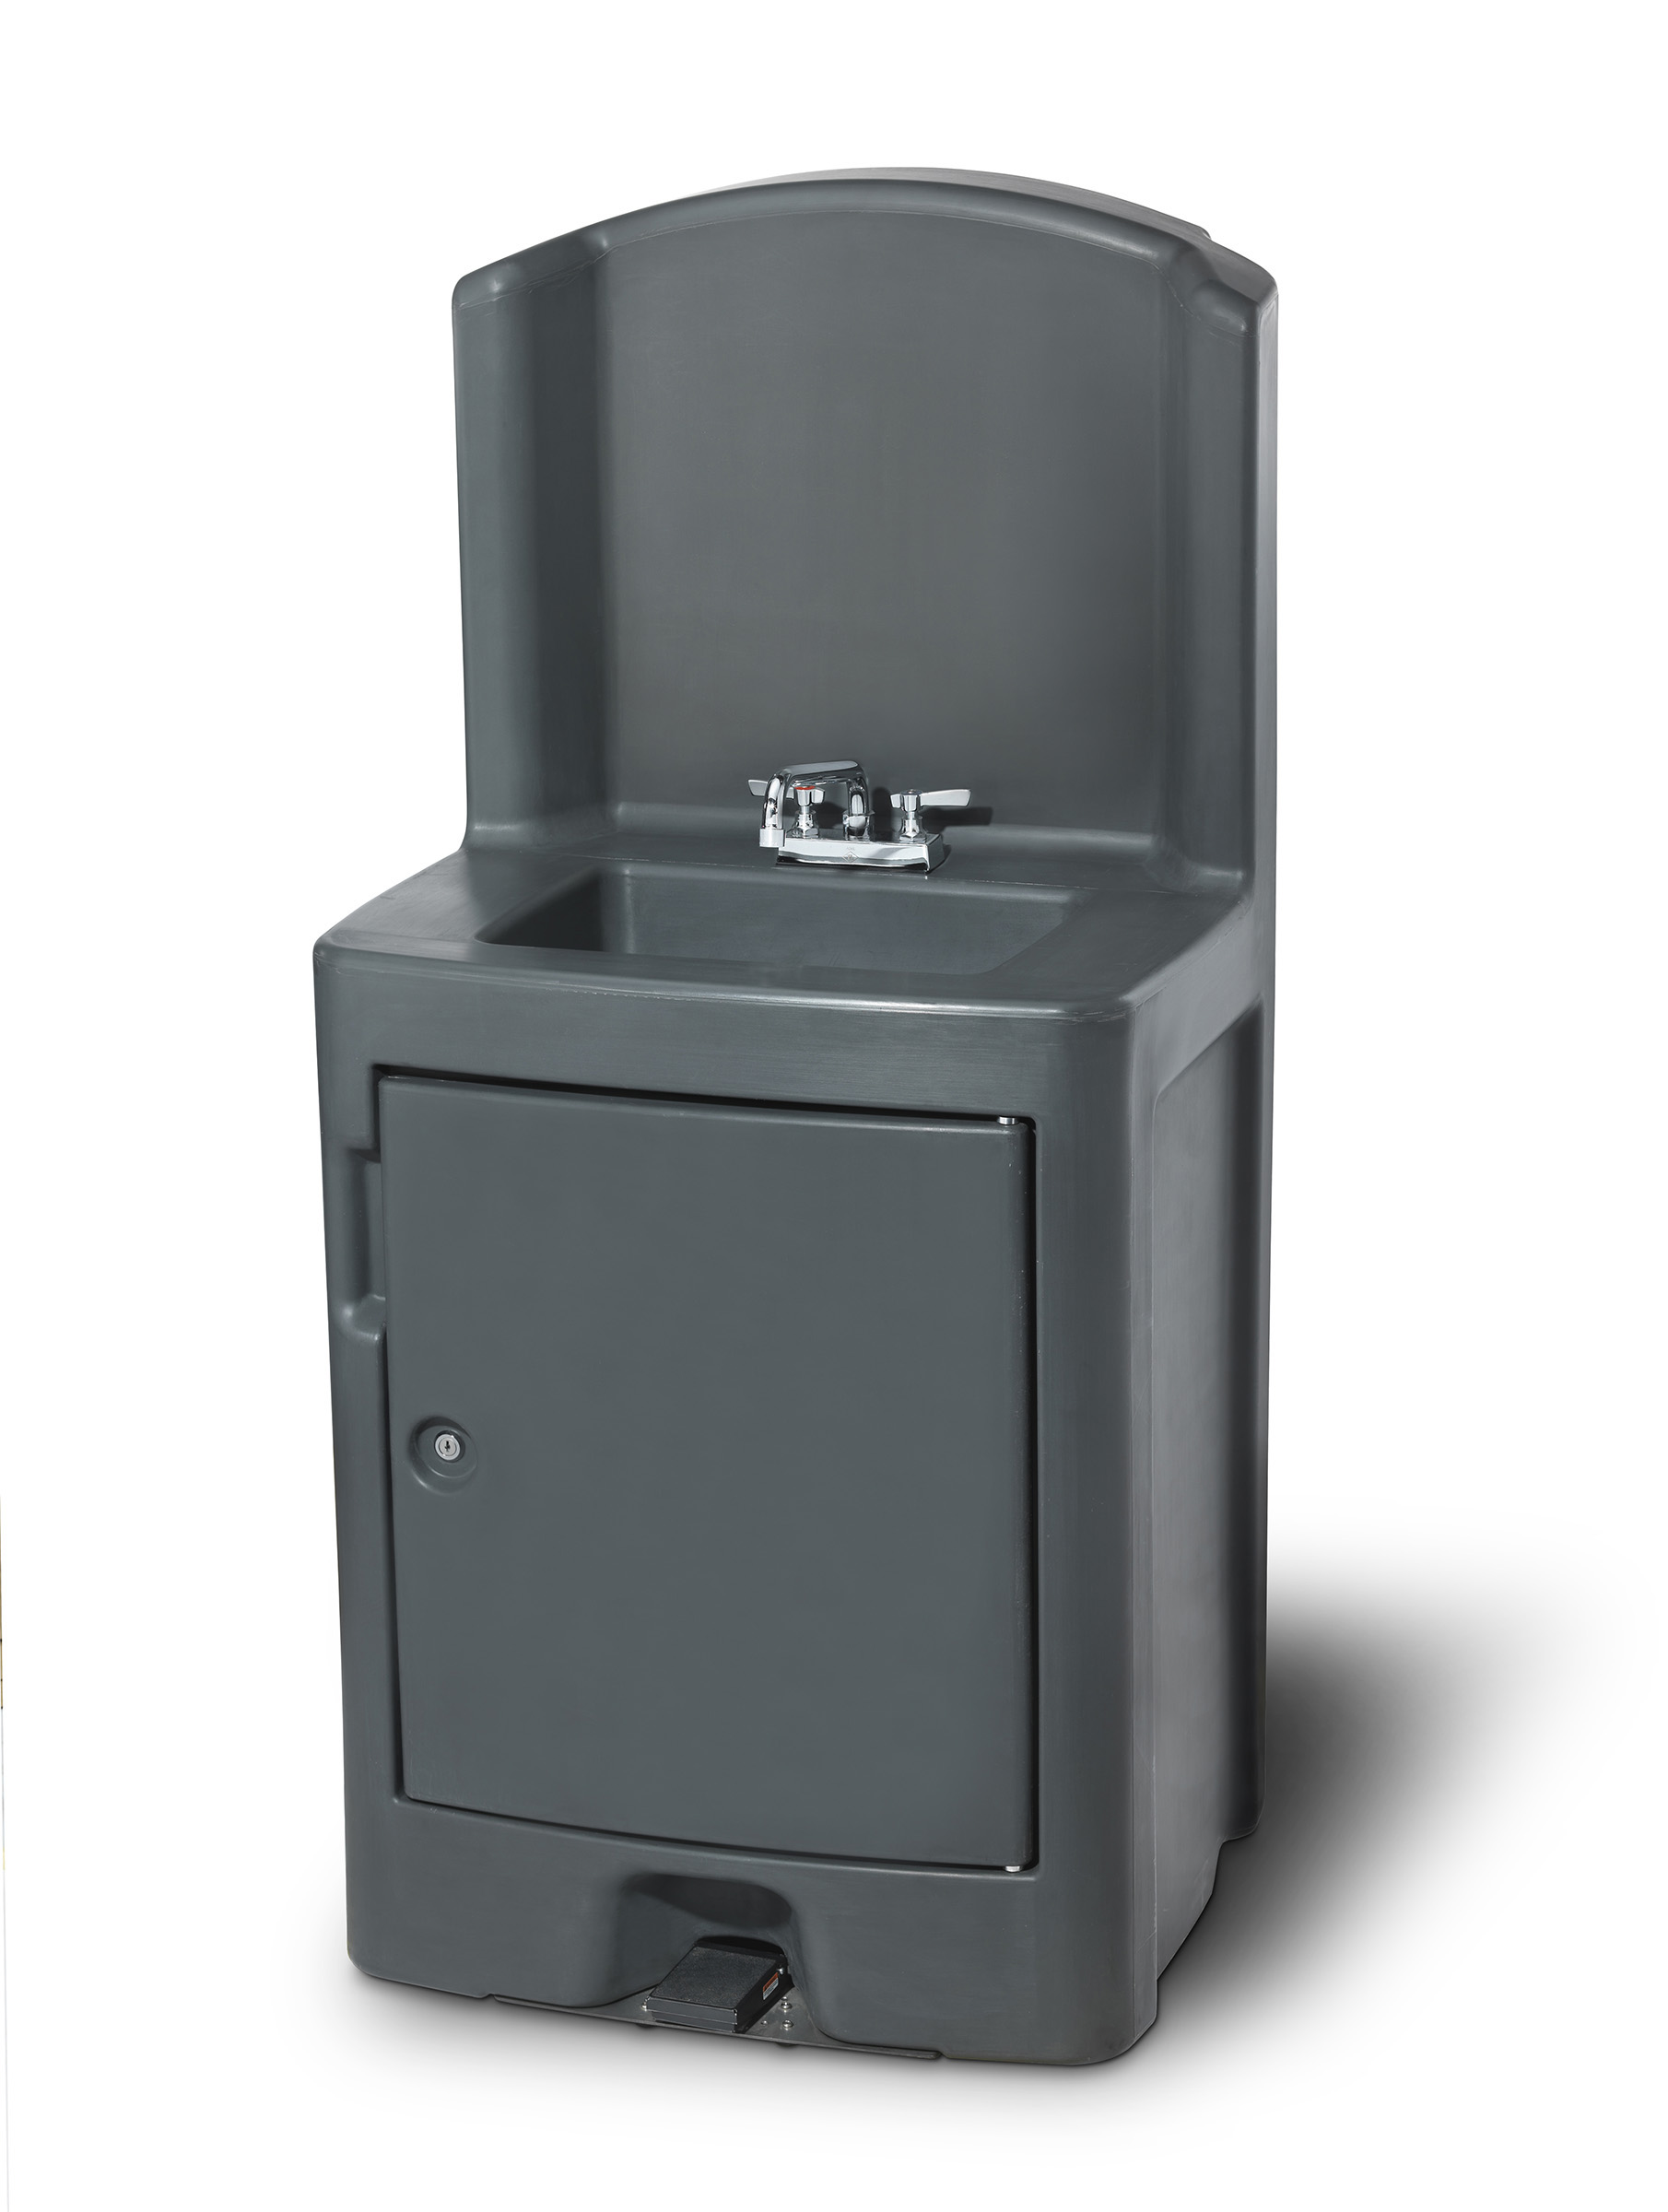 HAND WASHING STATION   5 Gallons (Cabinet Size 30”W x 27 3/8 ”D x 62” H) Actual Weight (lbs) 110, Sink Bowl Size 18” x 13” x 6” deep